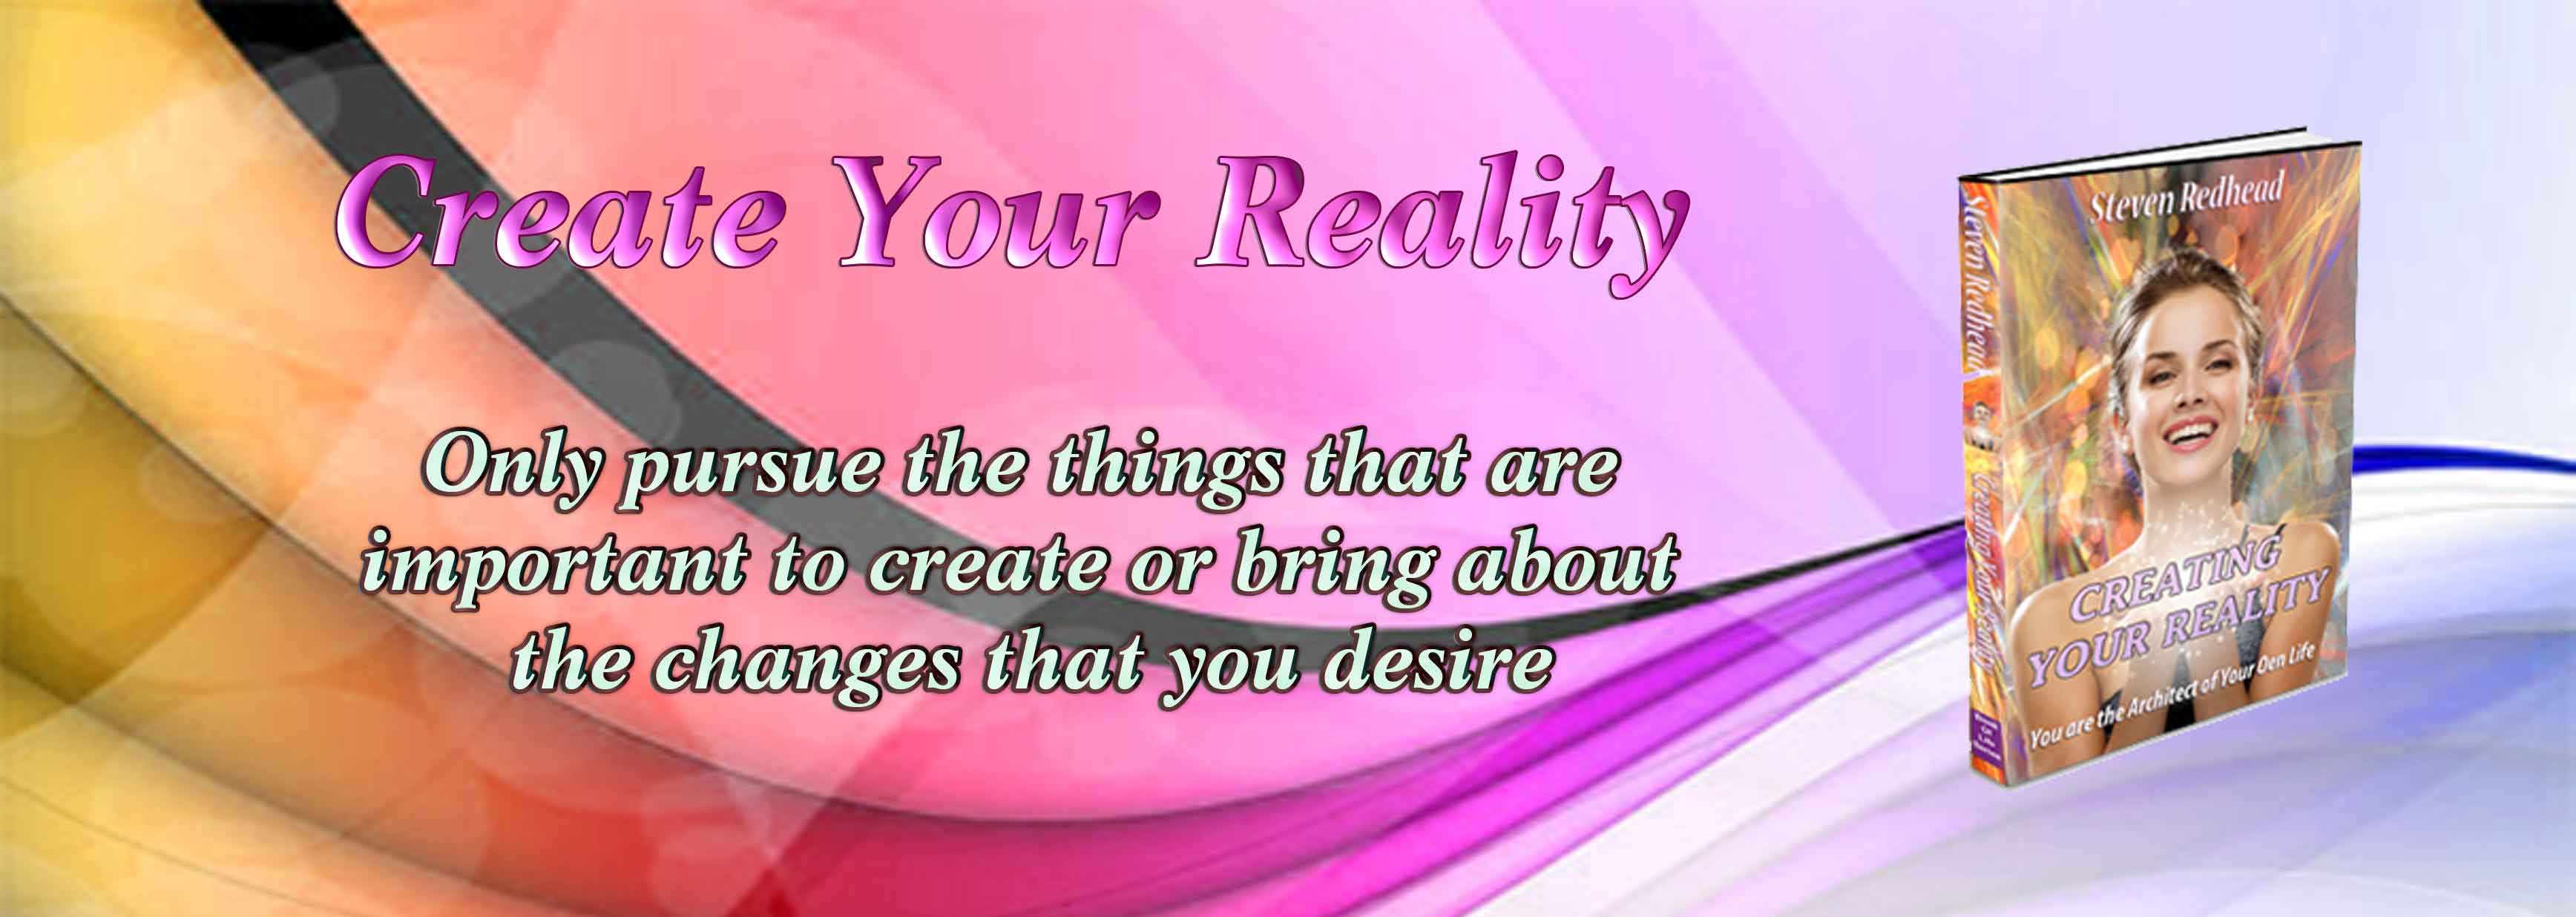 Creating Your Reality Book Desire Quote